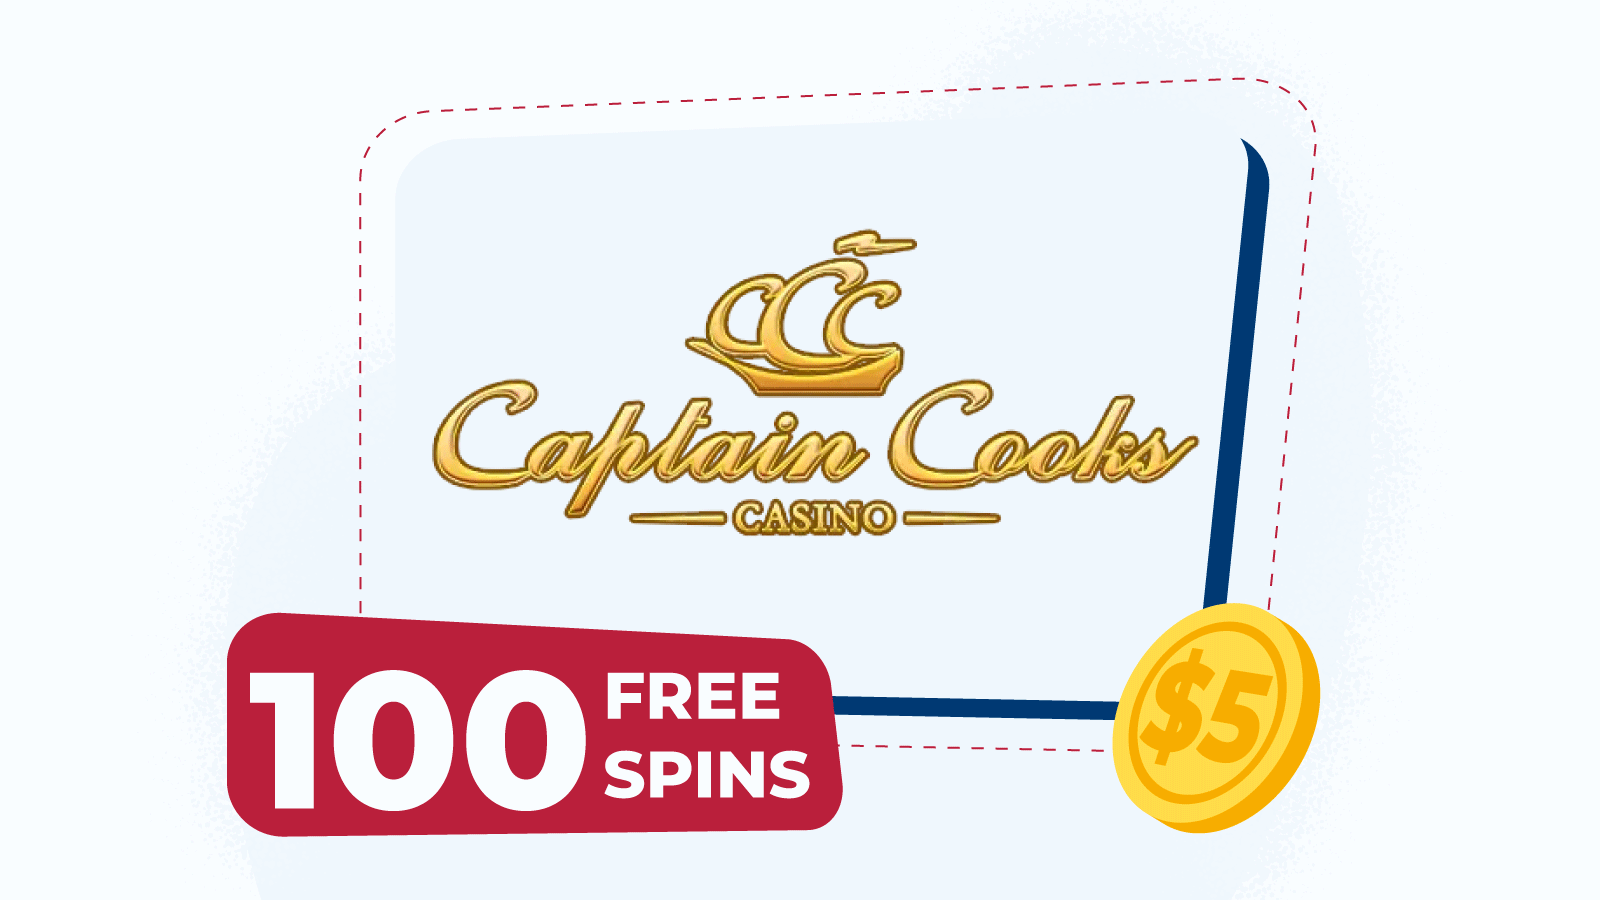 100 spins for $5 at Captain Cooks Casino